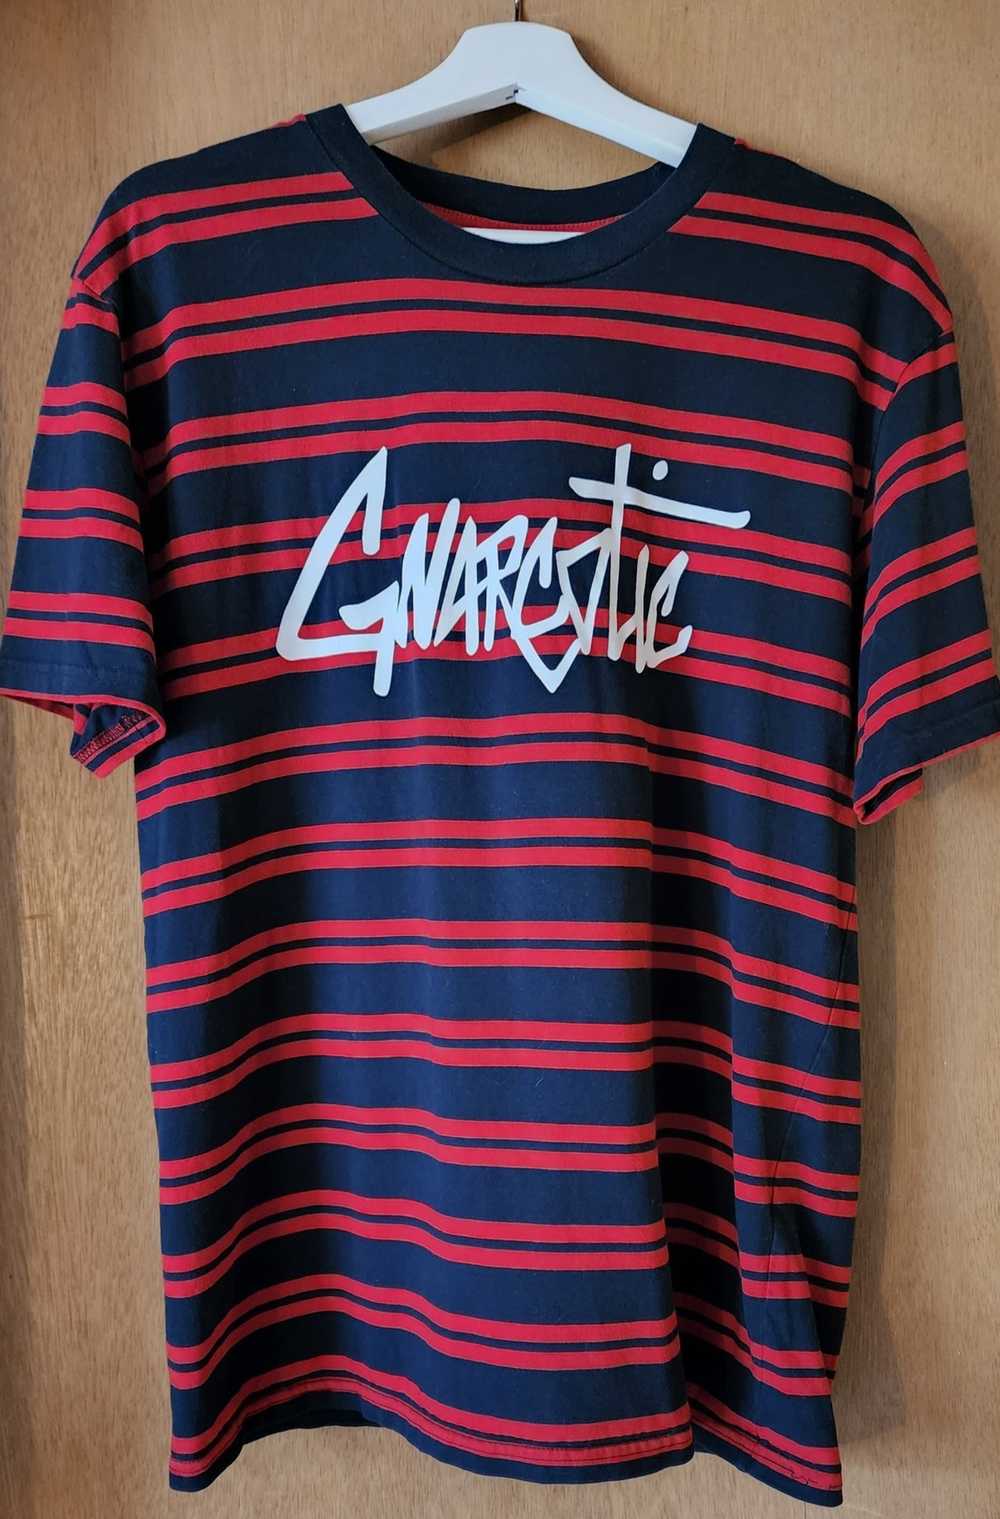 Gnarcotic Gnarcotic Striped T-Shirt - image 1